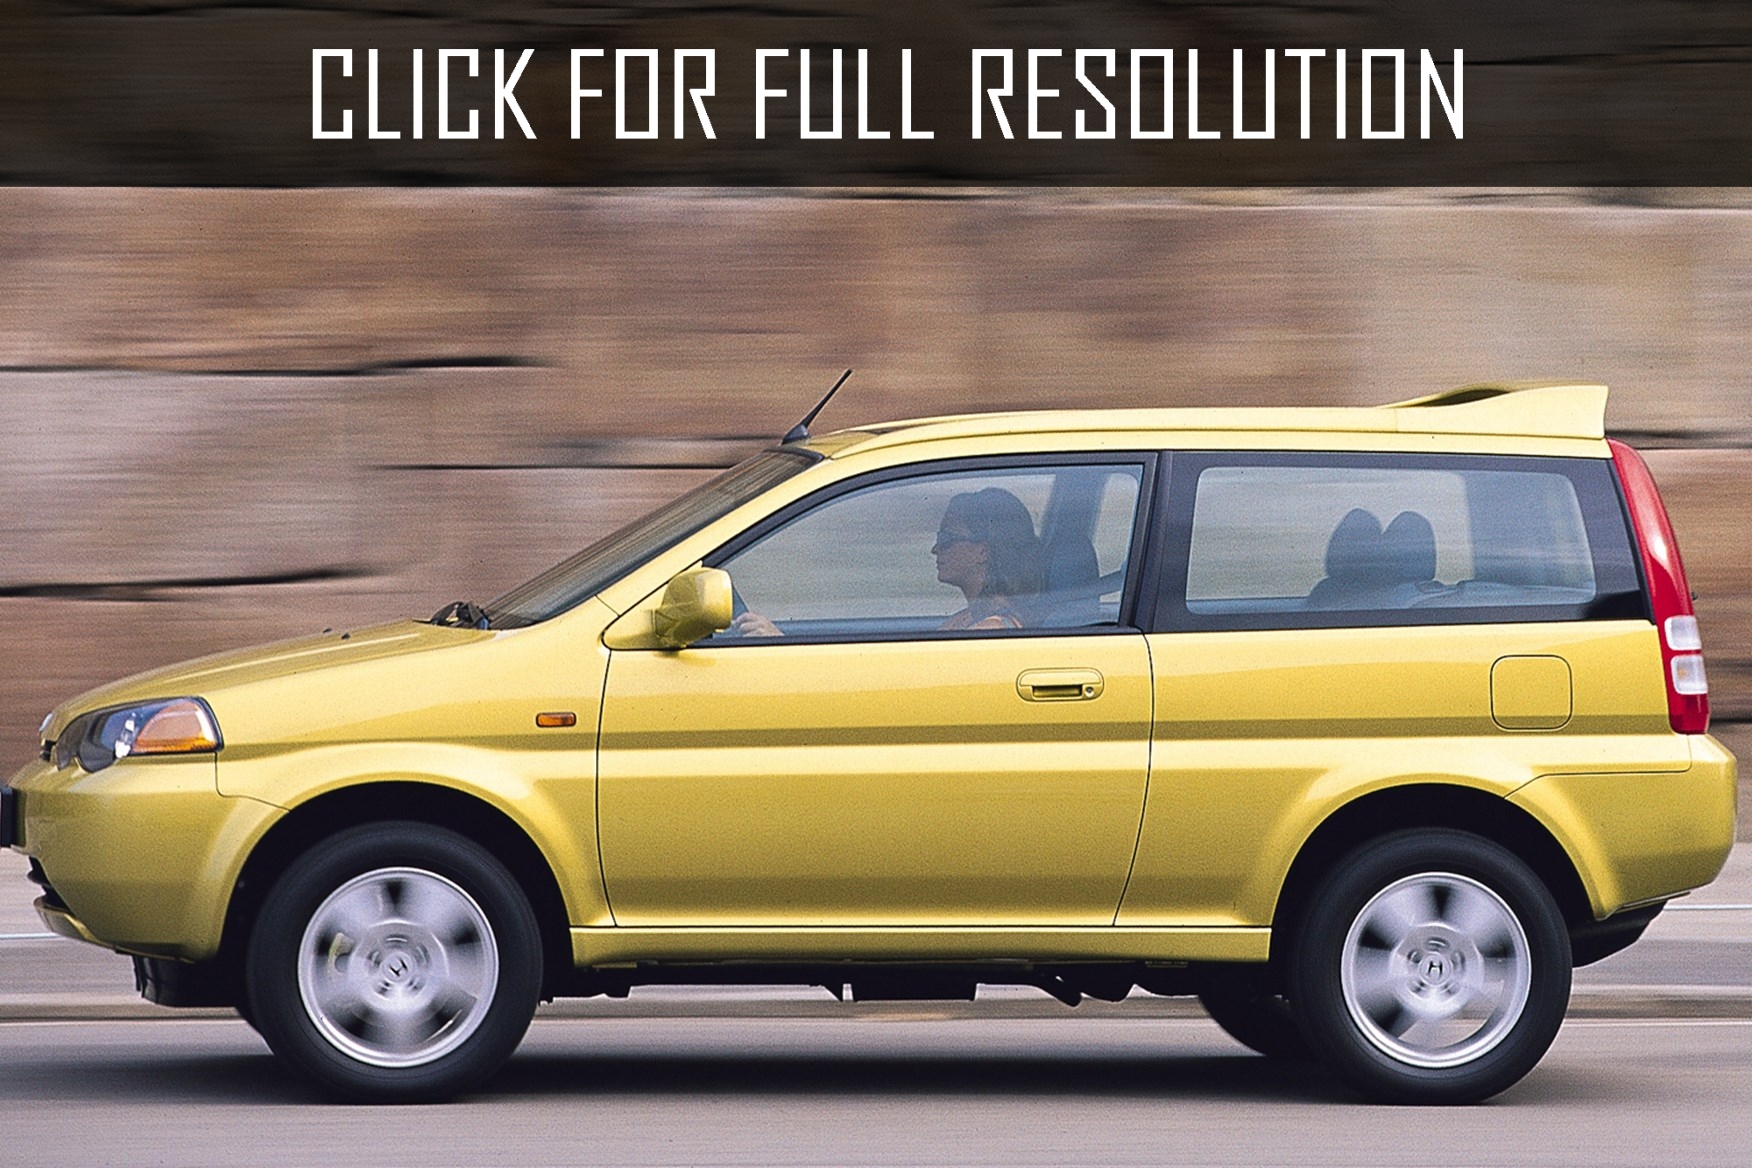 1998 Honda Hrv news, reviews, msrp, ratings with amazing